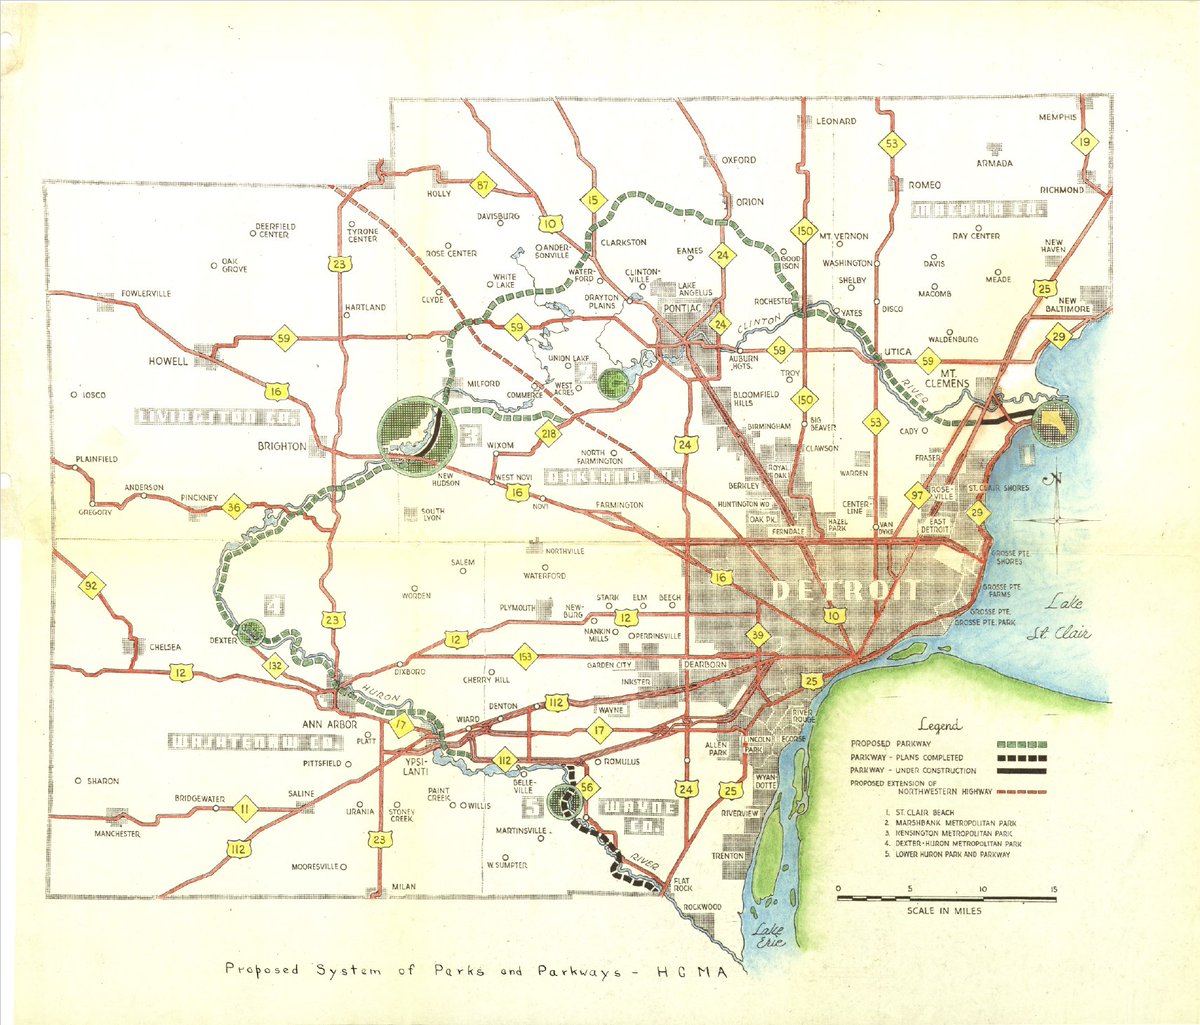 The original vision of linking the parks with a parkway was somewhat tabled under the influence of infamous racist planner Robert Moses. He consulted HCMA to ditch the parkway (which would have connected them perfectly to Detroit's Aves) and instead focus on freeway connections